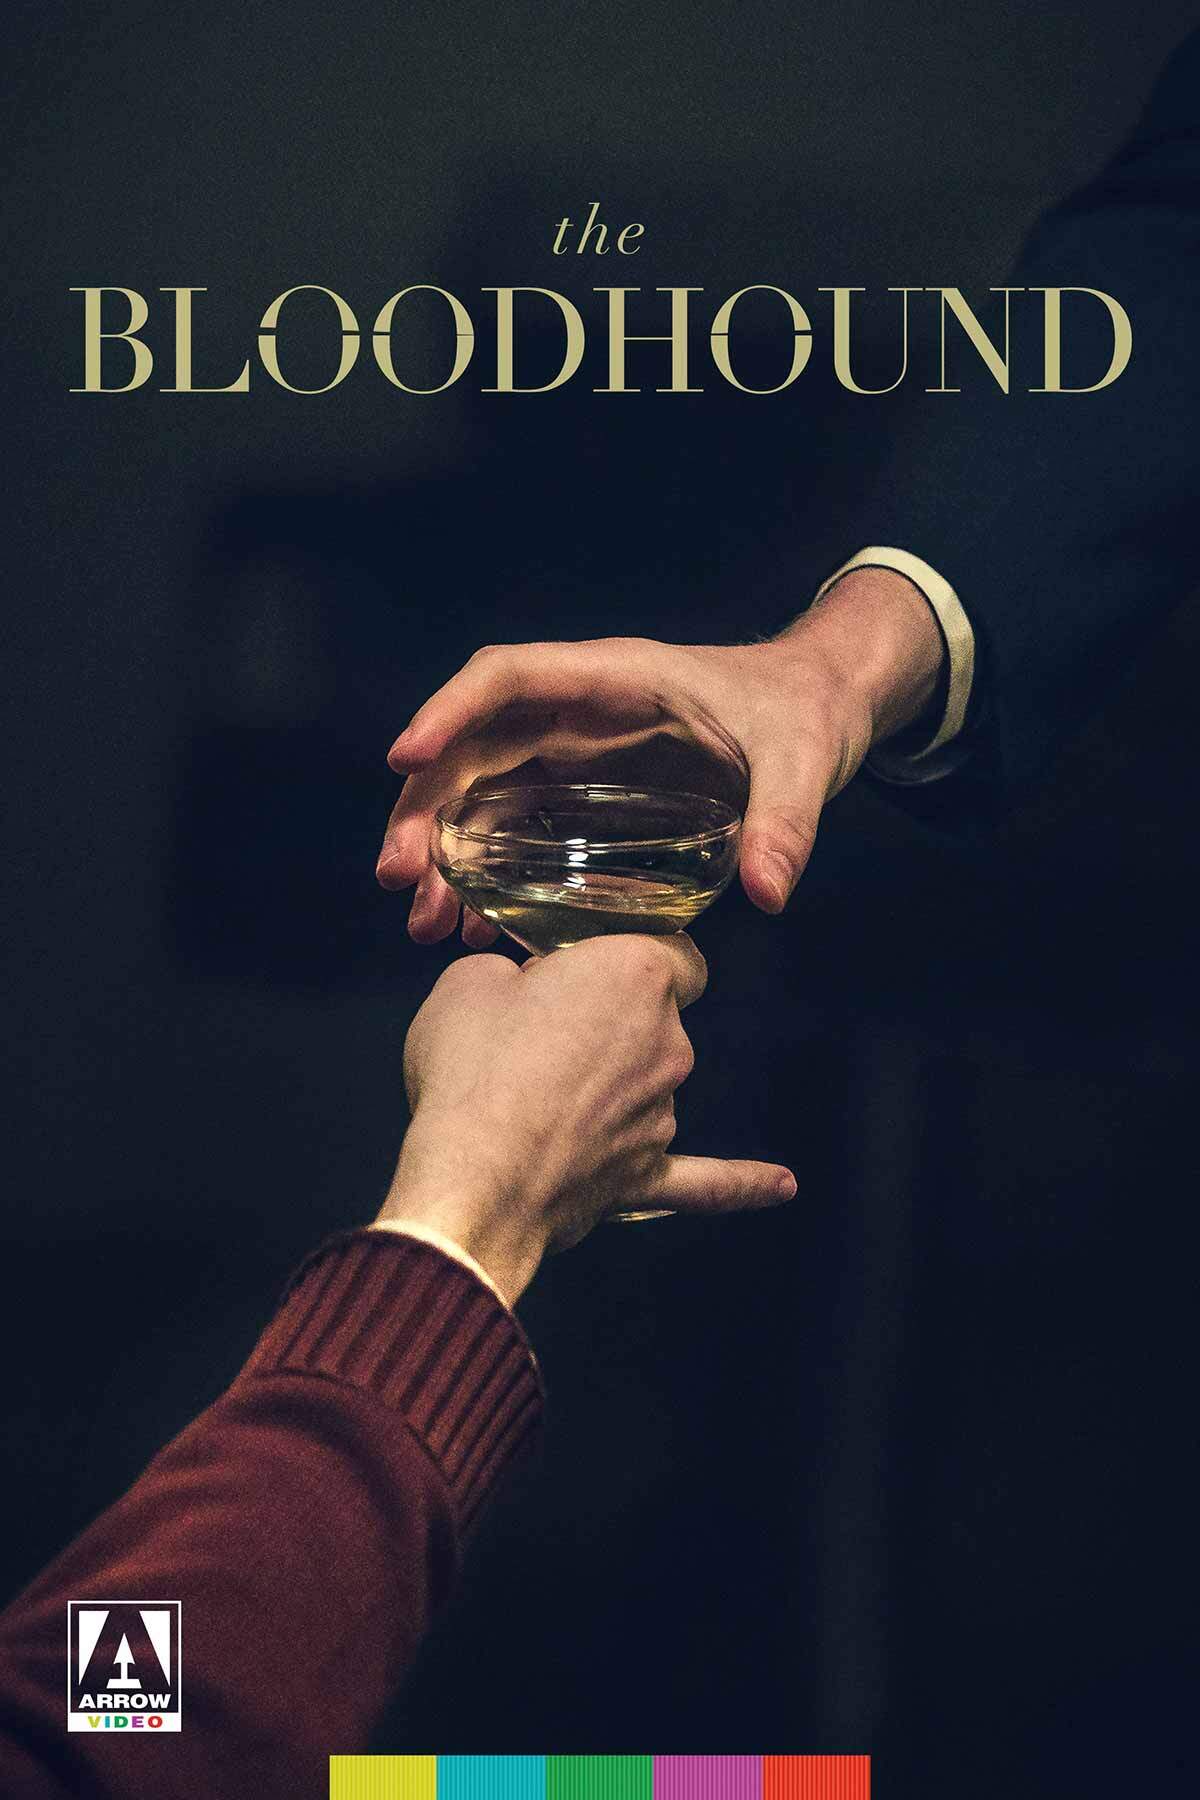 The Bloodhound Horror Movie Poster